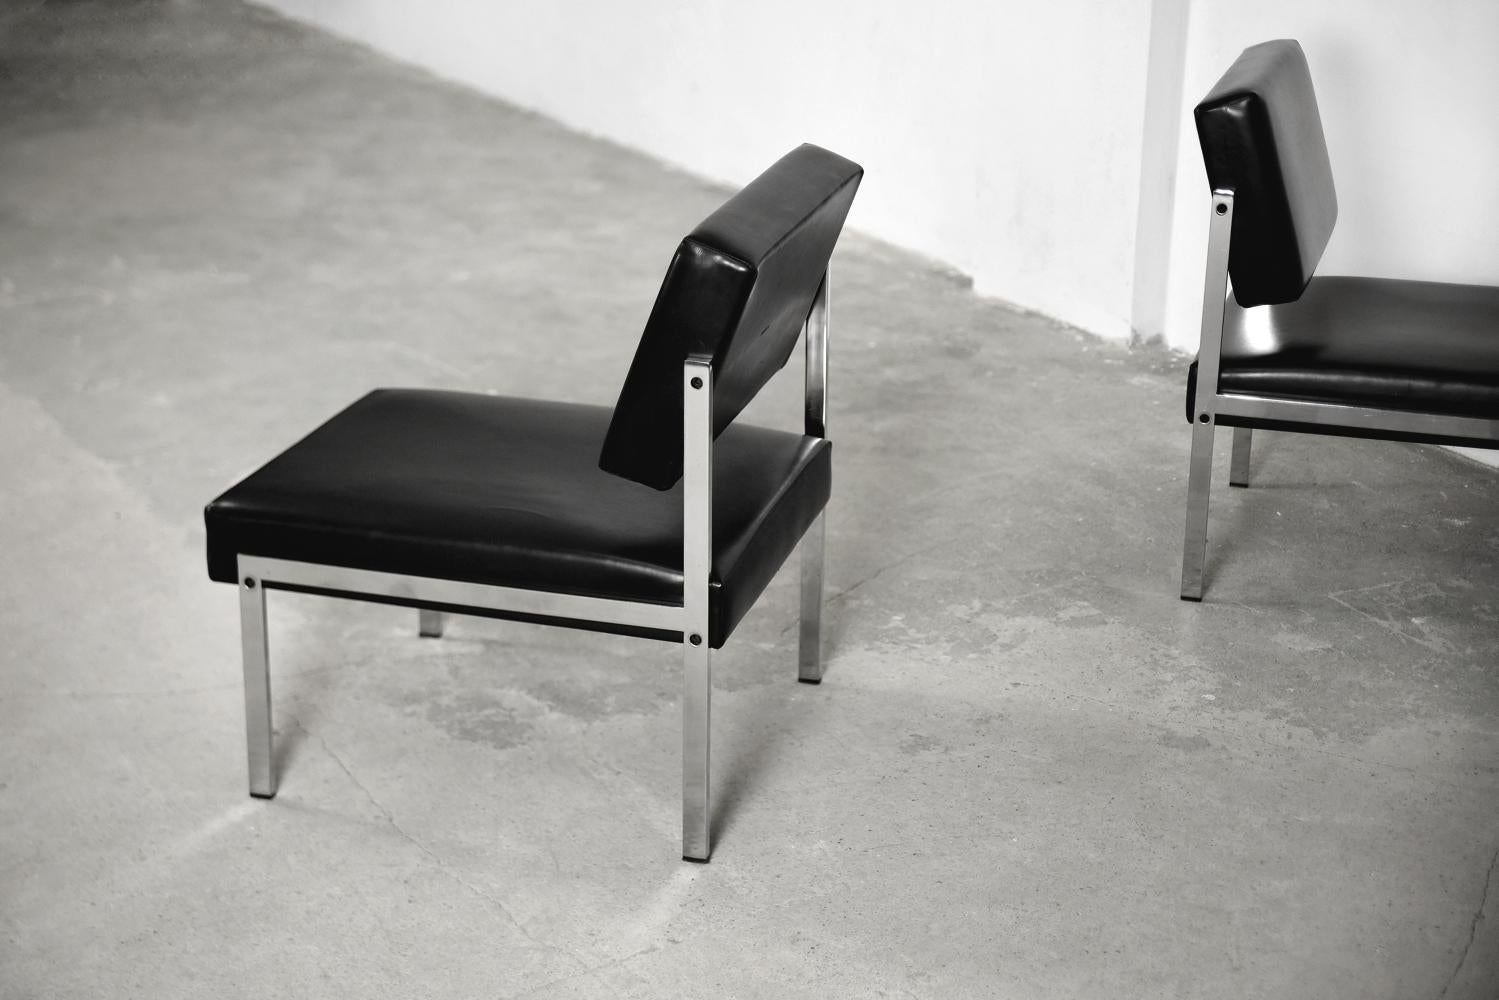 Steel Minimalist German Chrome and Leather Modular Lounge Chairs from Brune, 1960s For Sale